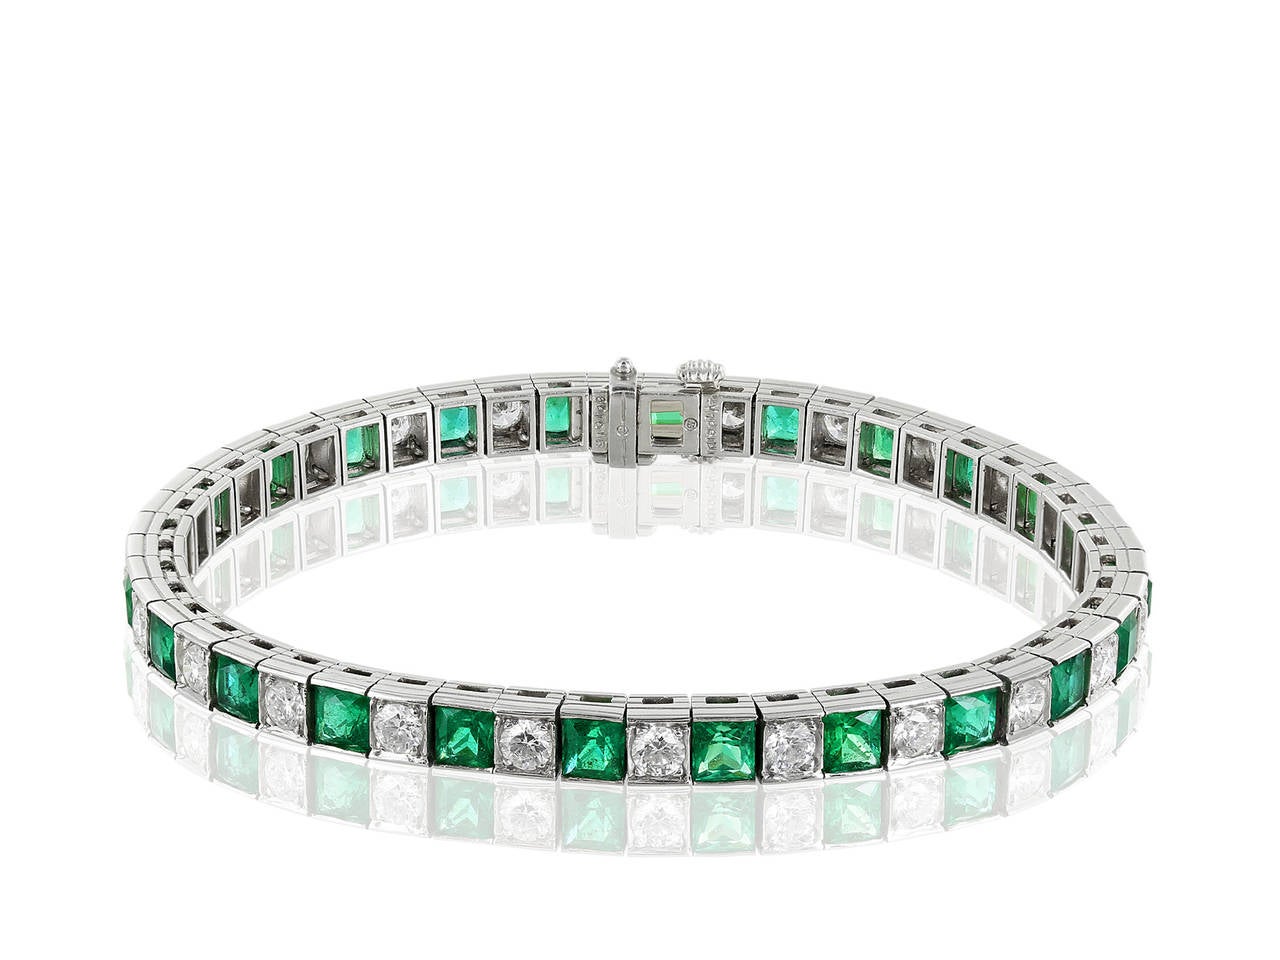 Platinum straight line bracelet consisting of 7.37 carats total weight of square cut emeralds alternating with 2.74 carats total weight of round brilliant cut diamonds having an approximate color and clarity of F-G/VS1-VS2. Signed Oscar Heyman.